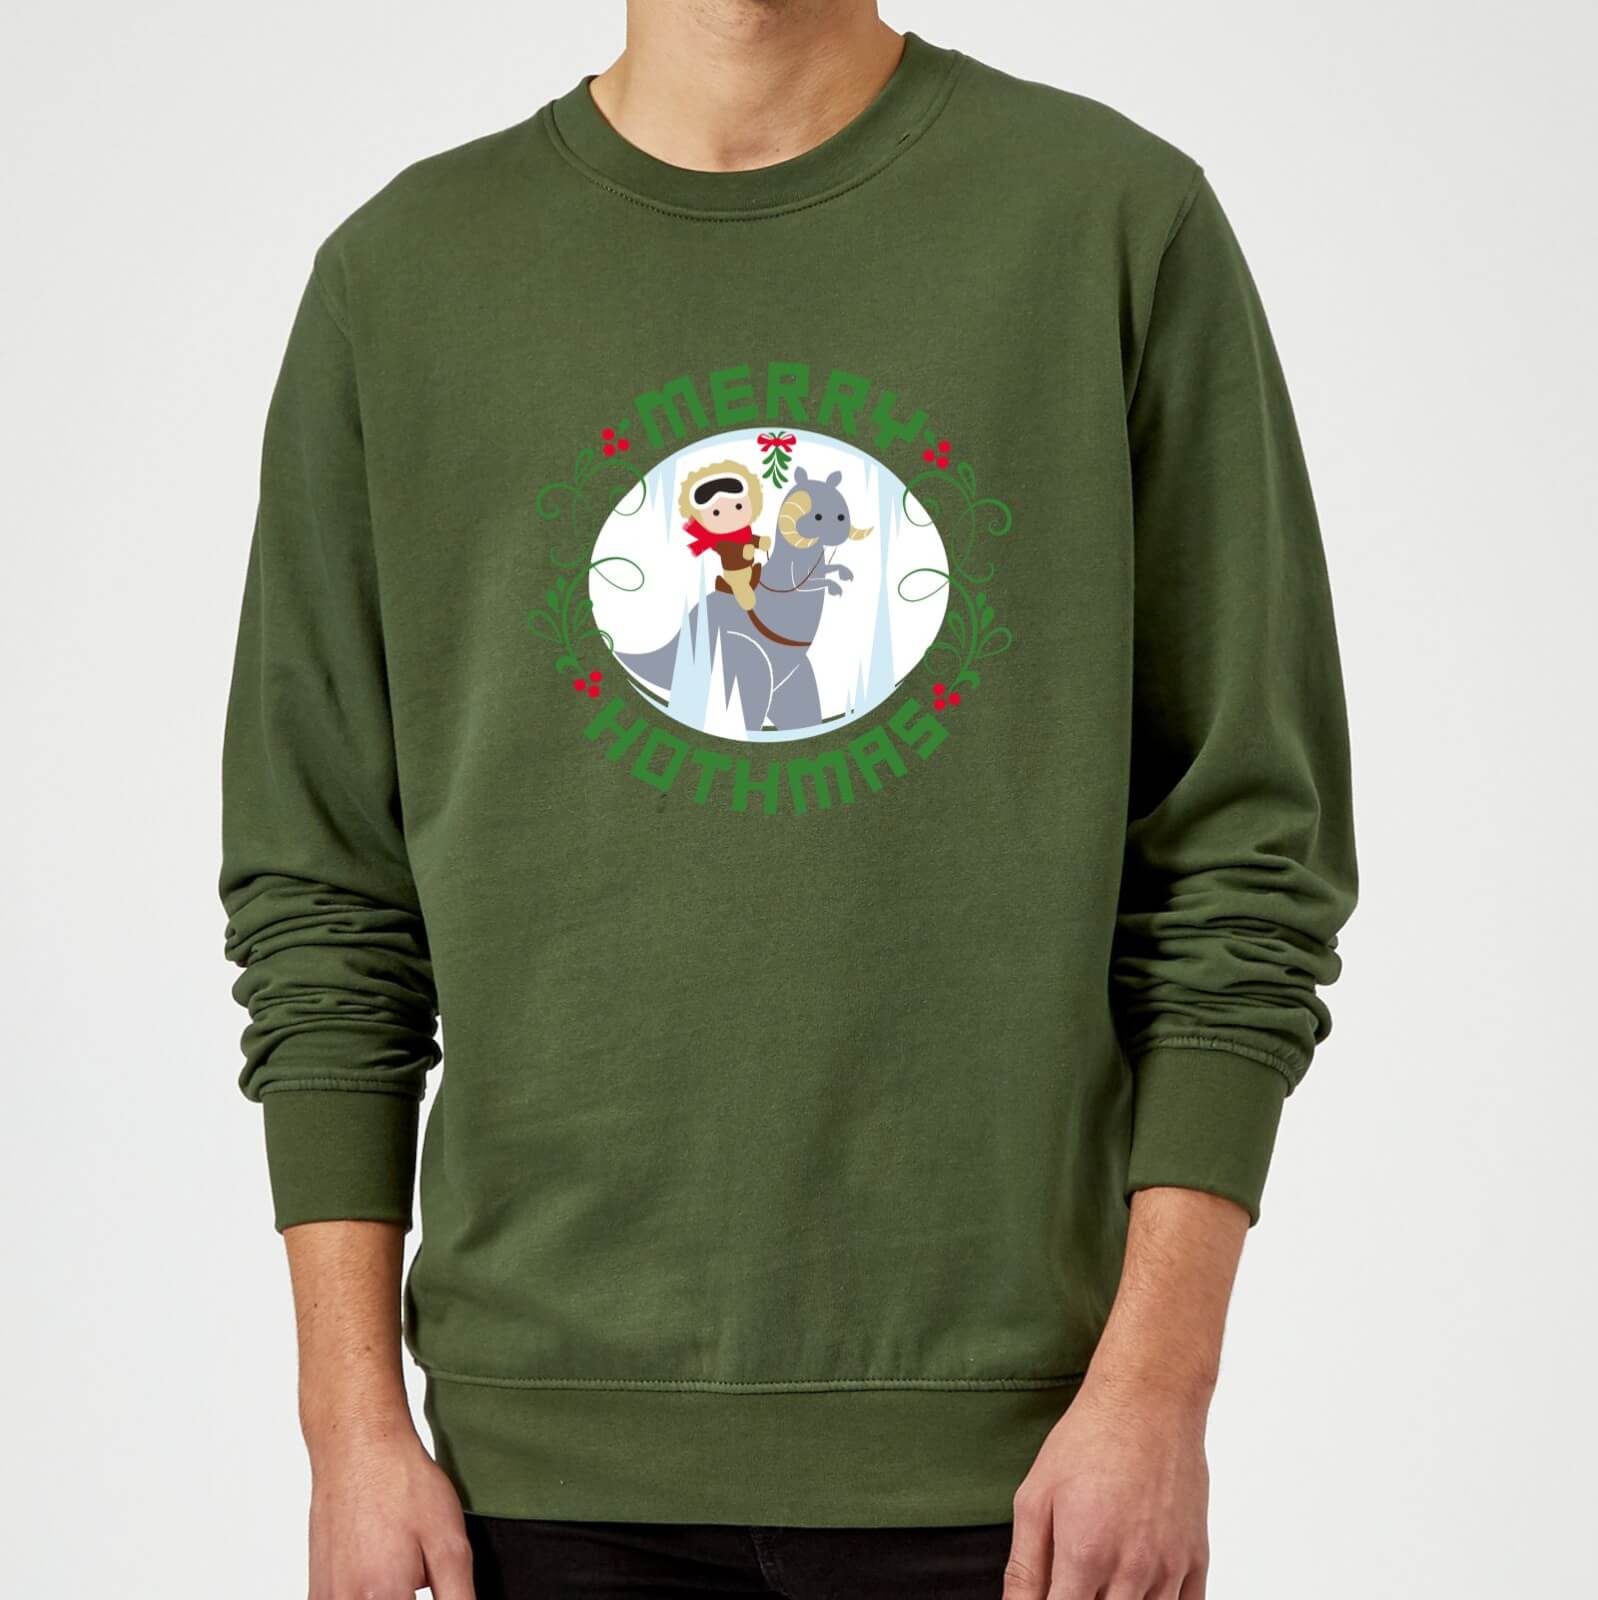 Star Wars Merry Hothmas Christmas Sweater - Forest Green - L - Forest Green